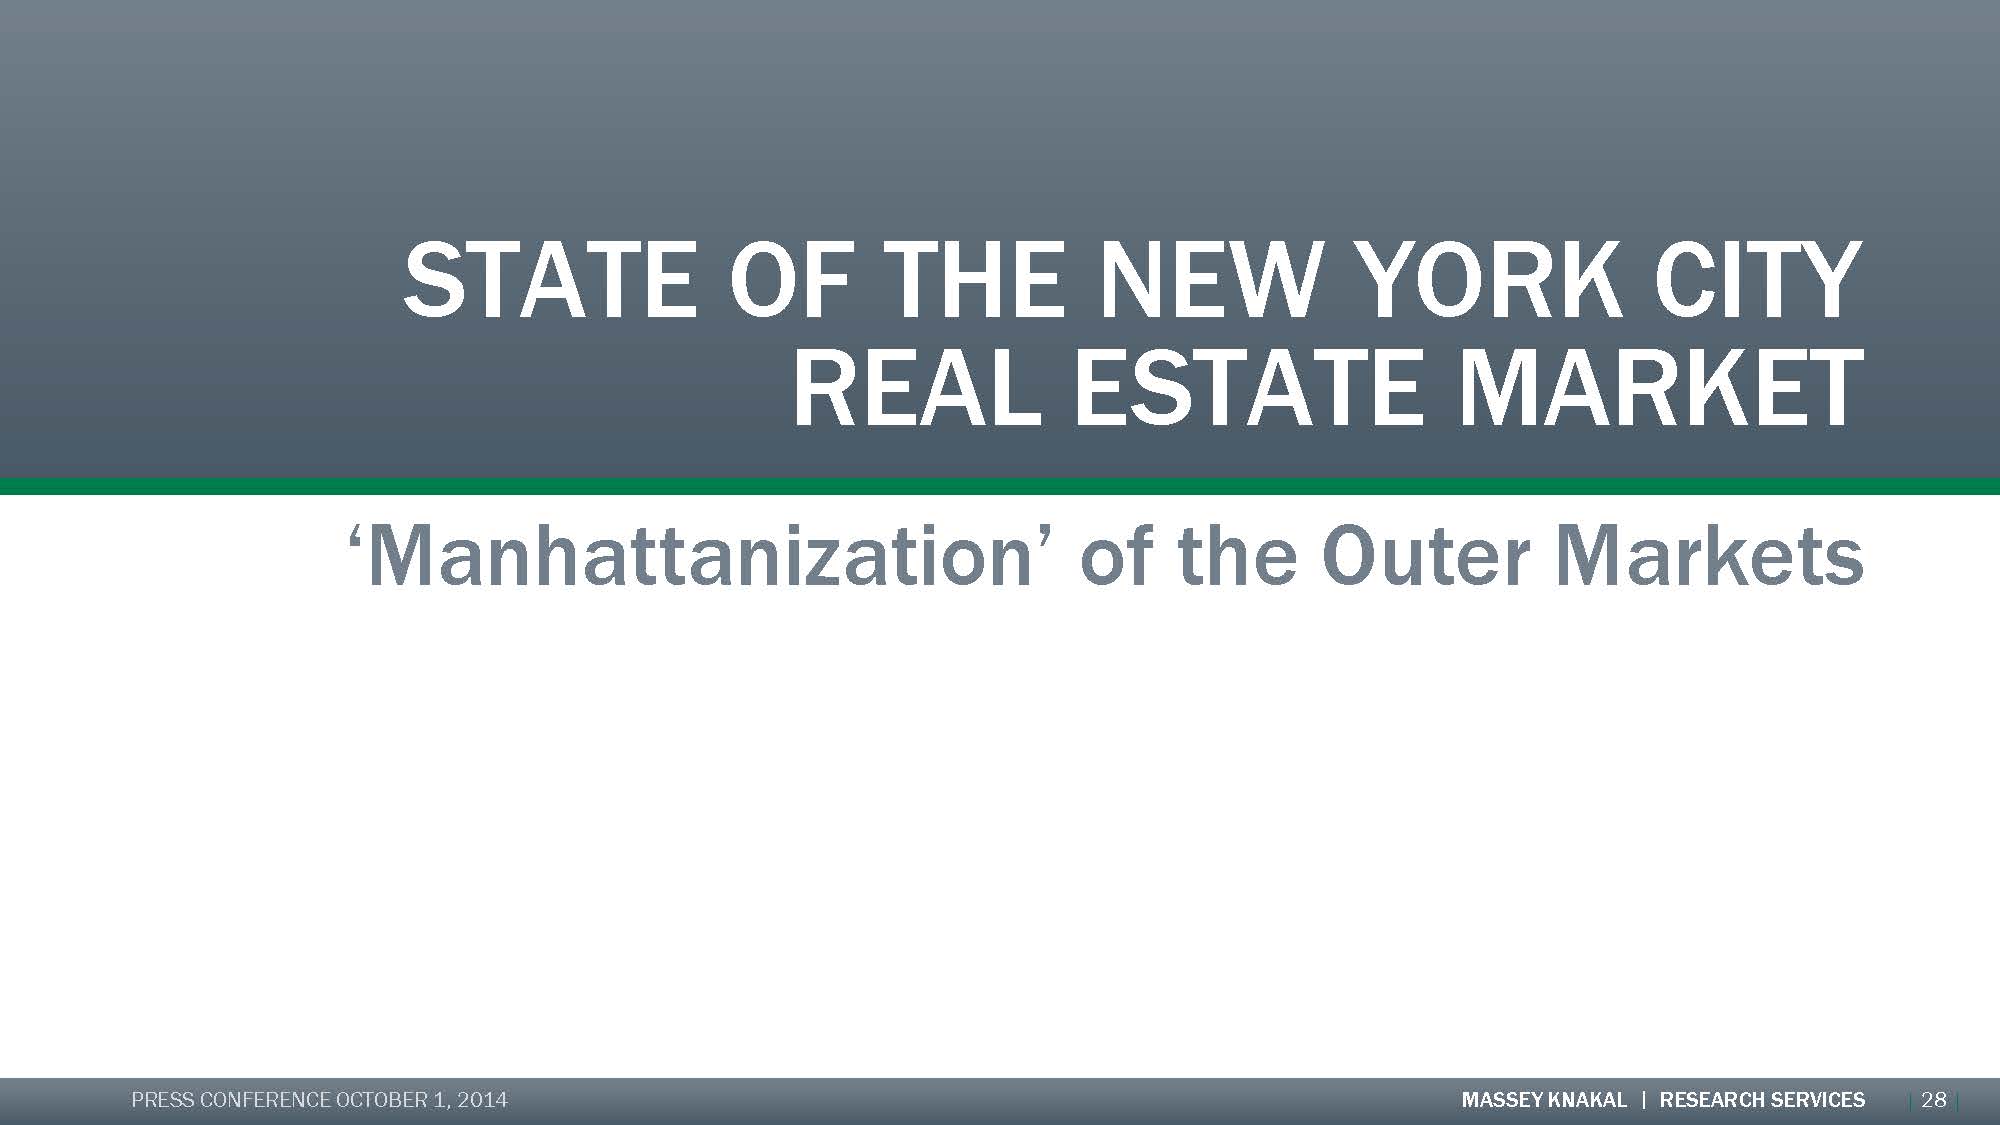 Slides 28 - 39 (Outer Markets) - 3Q14 state of the real estate market 10_01_2014_Page_01